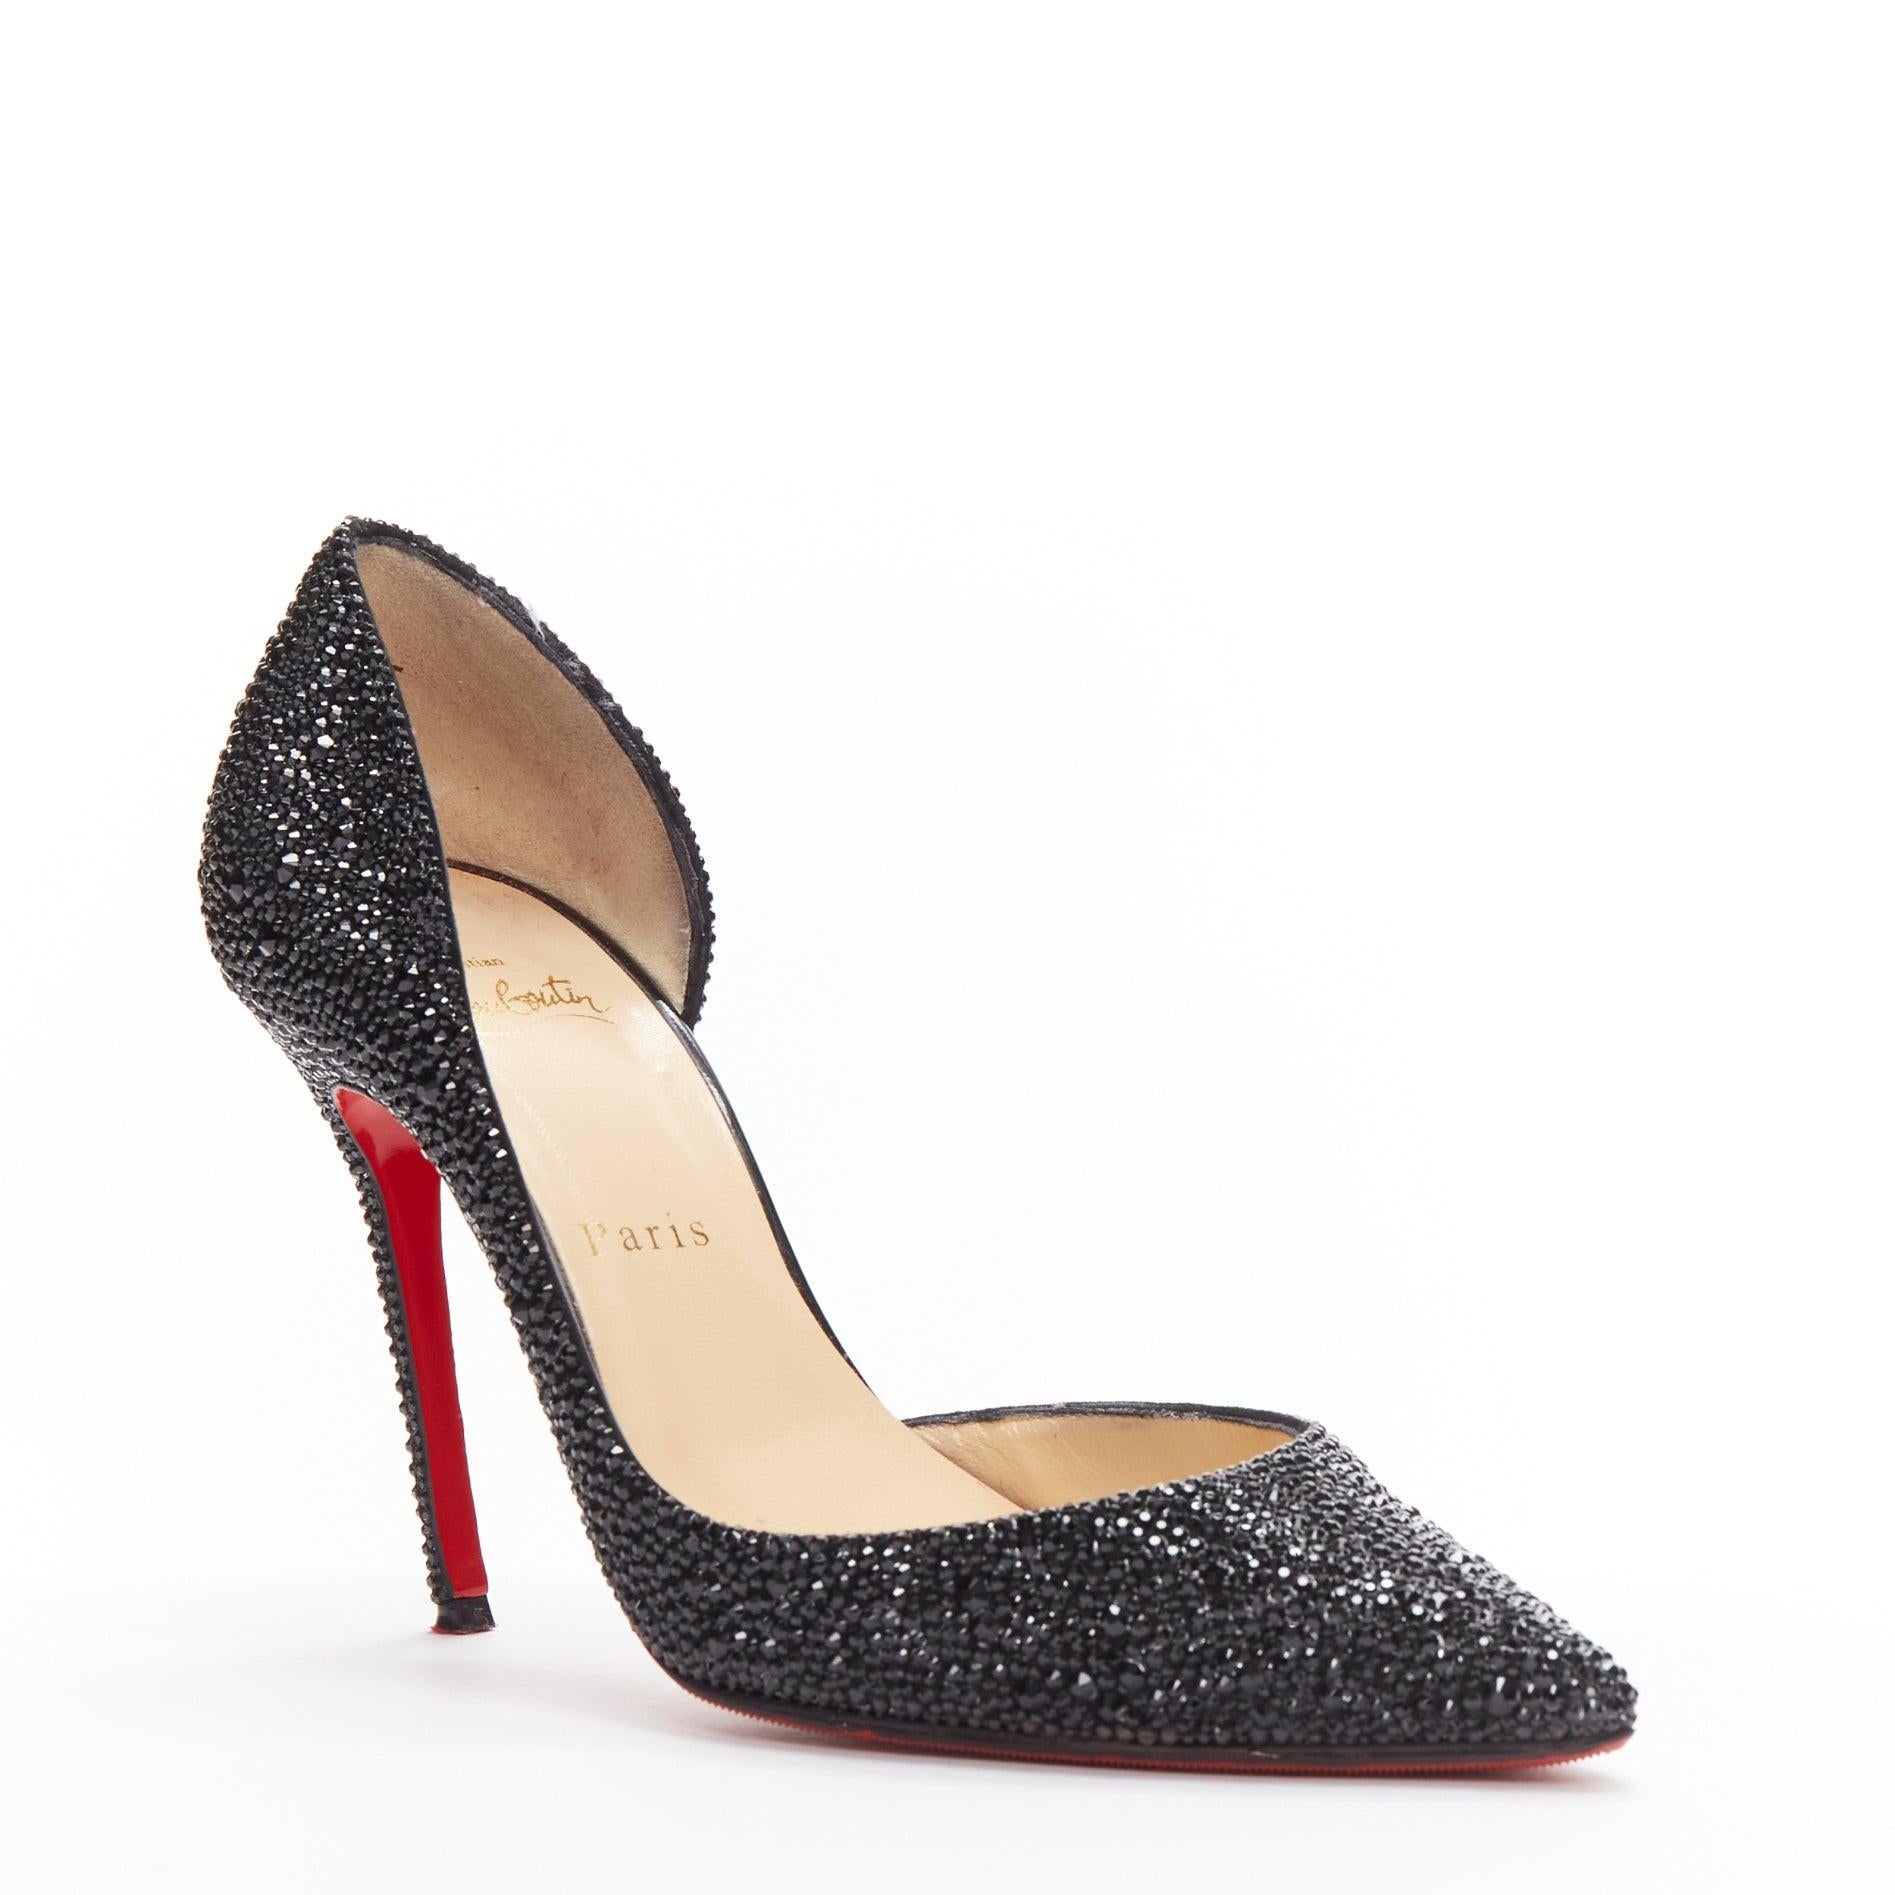 CHRISTIAN LOUBOUTIN Iriza 100 black rhinestone strass dorsay pumps EU38
Reference: TGAS/D00857
Brand: Christian Louboutin
Model: Iriza 100
Material: Leather
Color: Black
Pattern: Solid
Closure: Slip On
Lining: Nude Leather
Extra Details: Fully